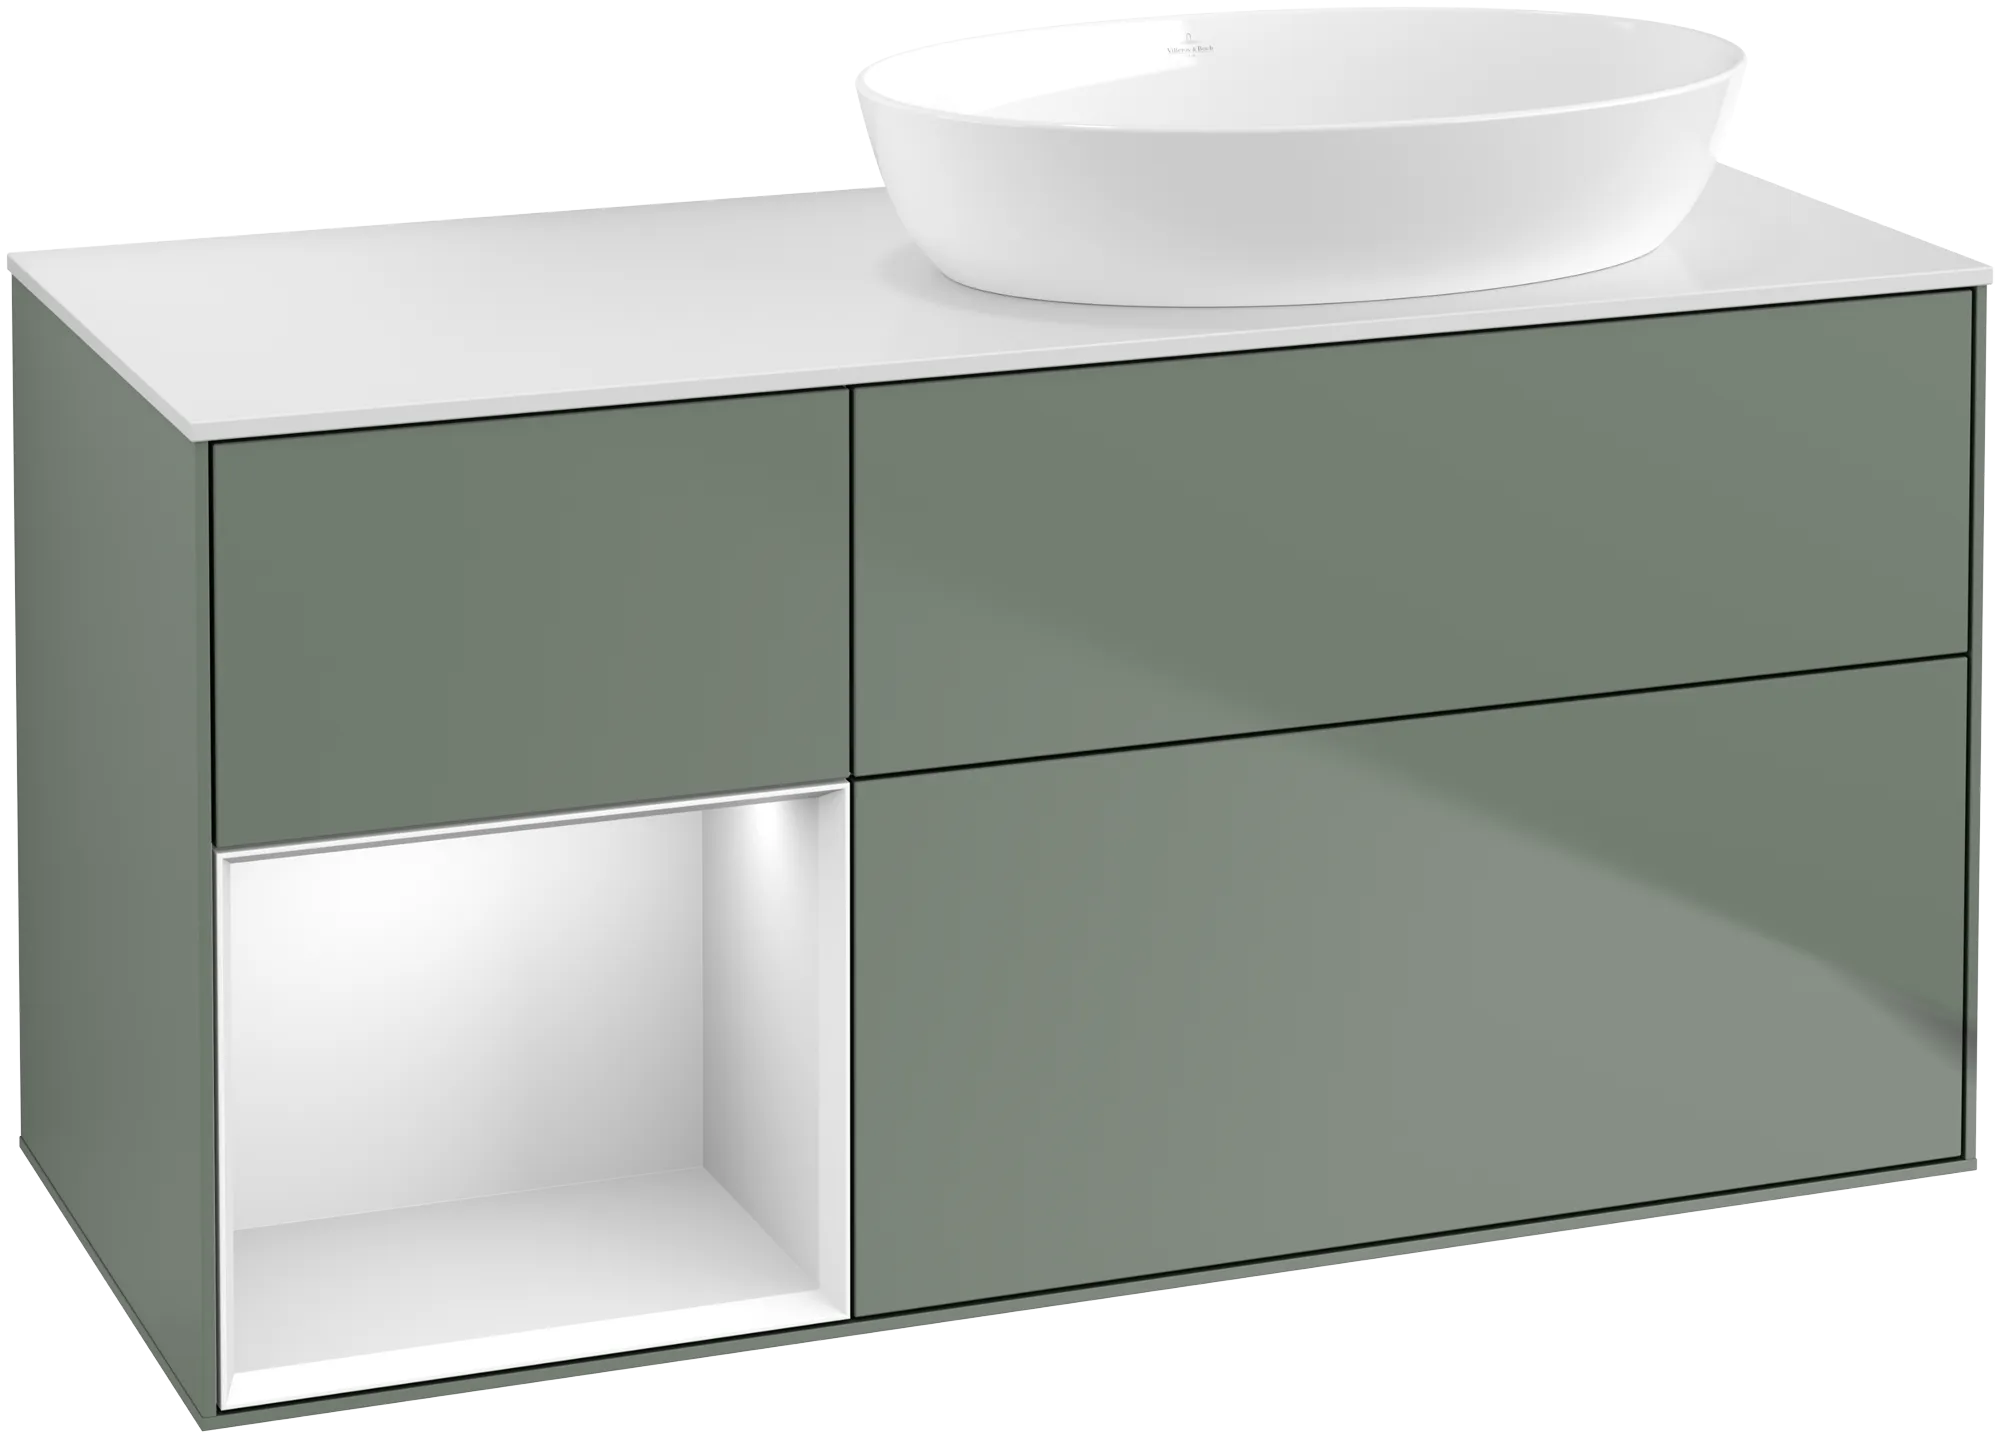 Picture of VILLEROY BOCH Finion Vanity unit, with lighting, 3 pull-out compartments, 1200 x 603 x 501 mm, Olive Matt Lacquer / White Matt Lacquer / Glass White Matt #GA41MTGM